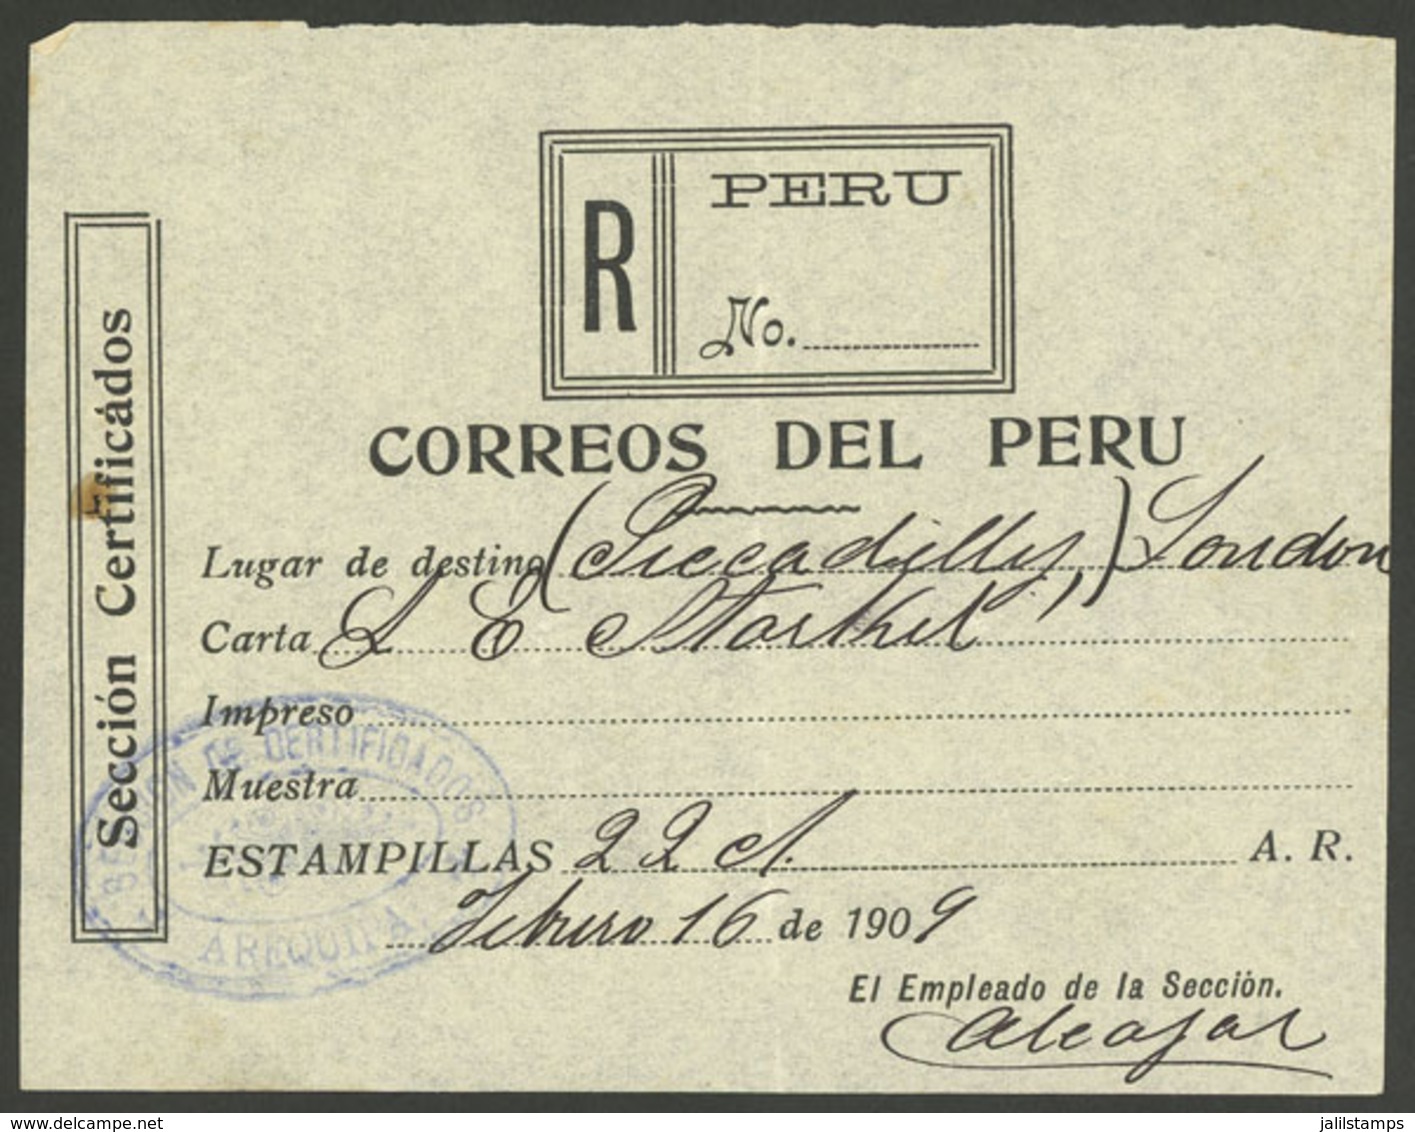 PERU: Receipt For A Registered Letter Sent From Arequipa To London On 16/FE/1909, VF Quality! Ex-Herbert Moll - Peru